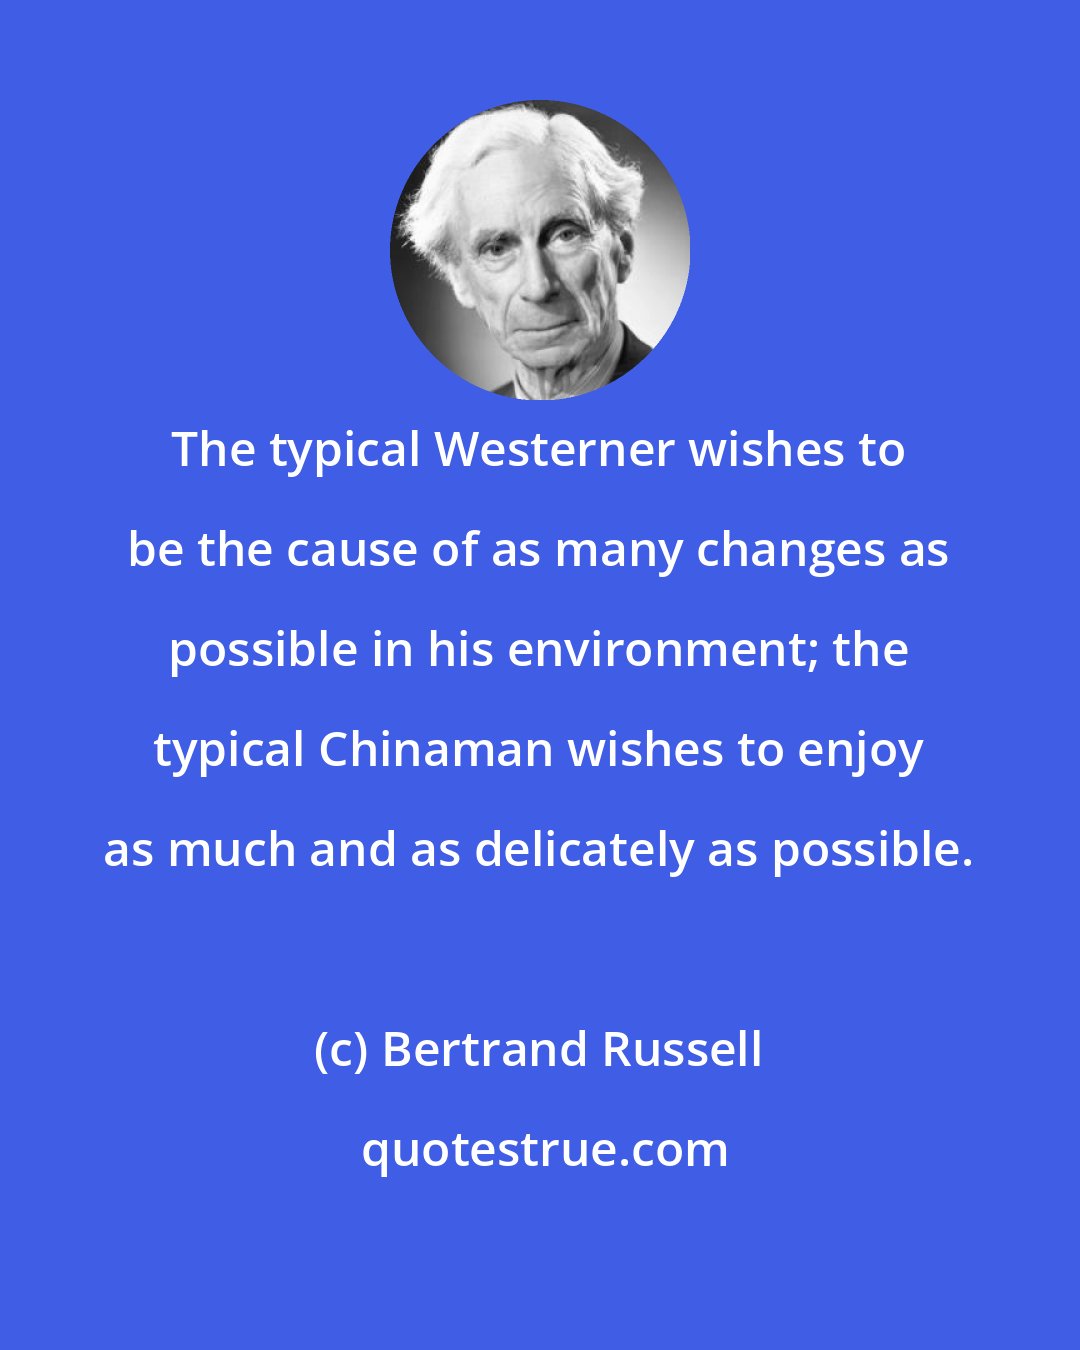 Bertrand Russell: The typical Westerner wishes to be the cause of as many changes as possible in his environment; the typical Chinaman wishes to enjoy as much and as delicately as possible.